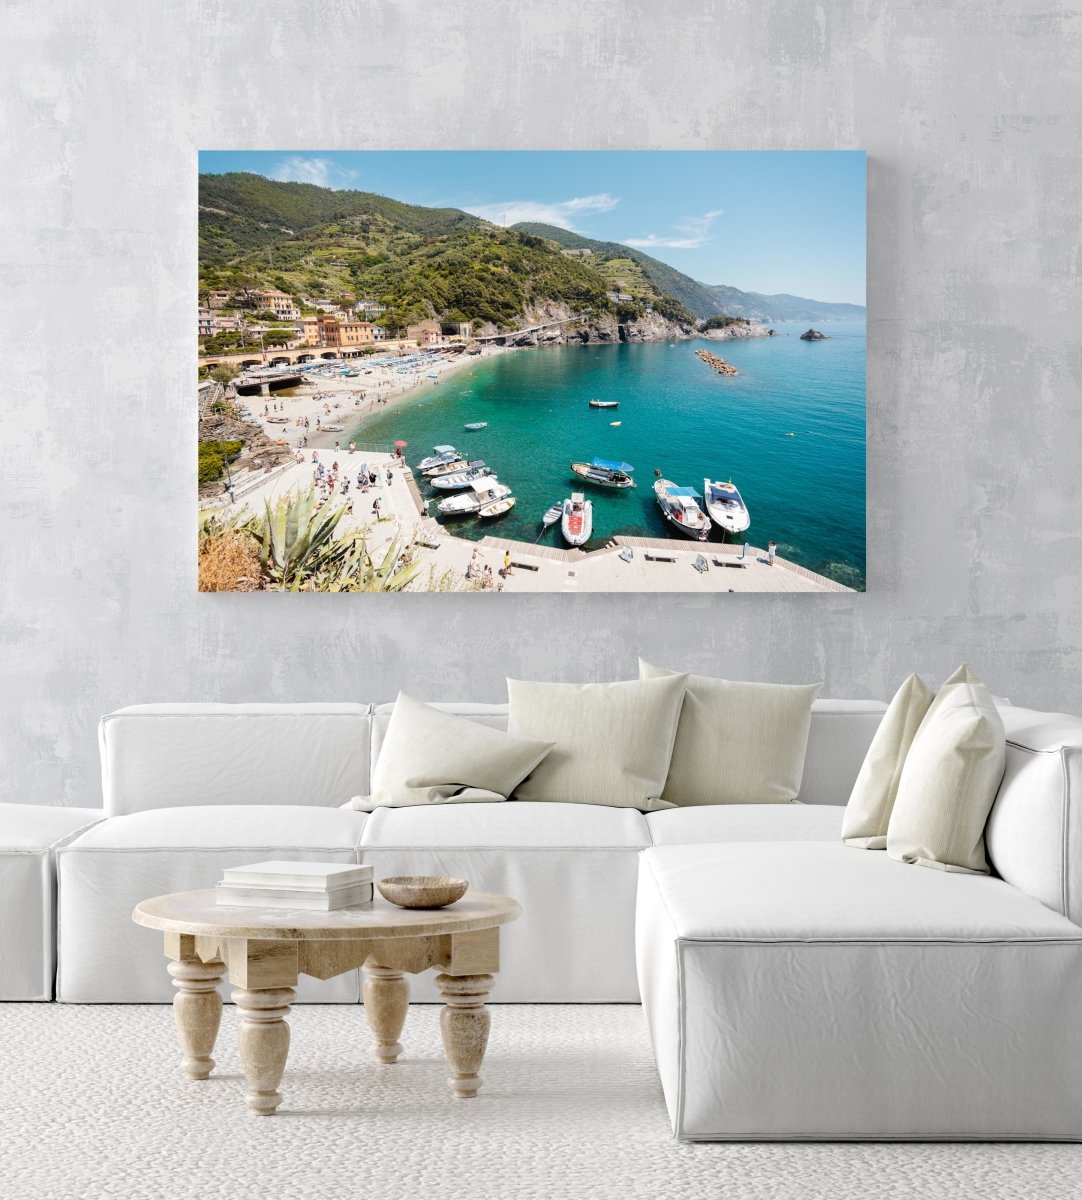 Boats docked along promenade of old town Monterosso during summer in Cinque Terre in an acrylic/perspex frame